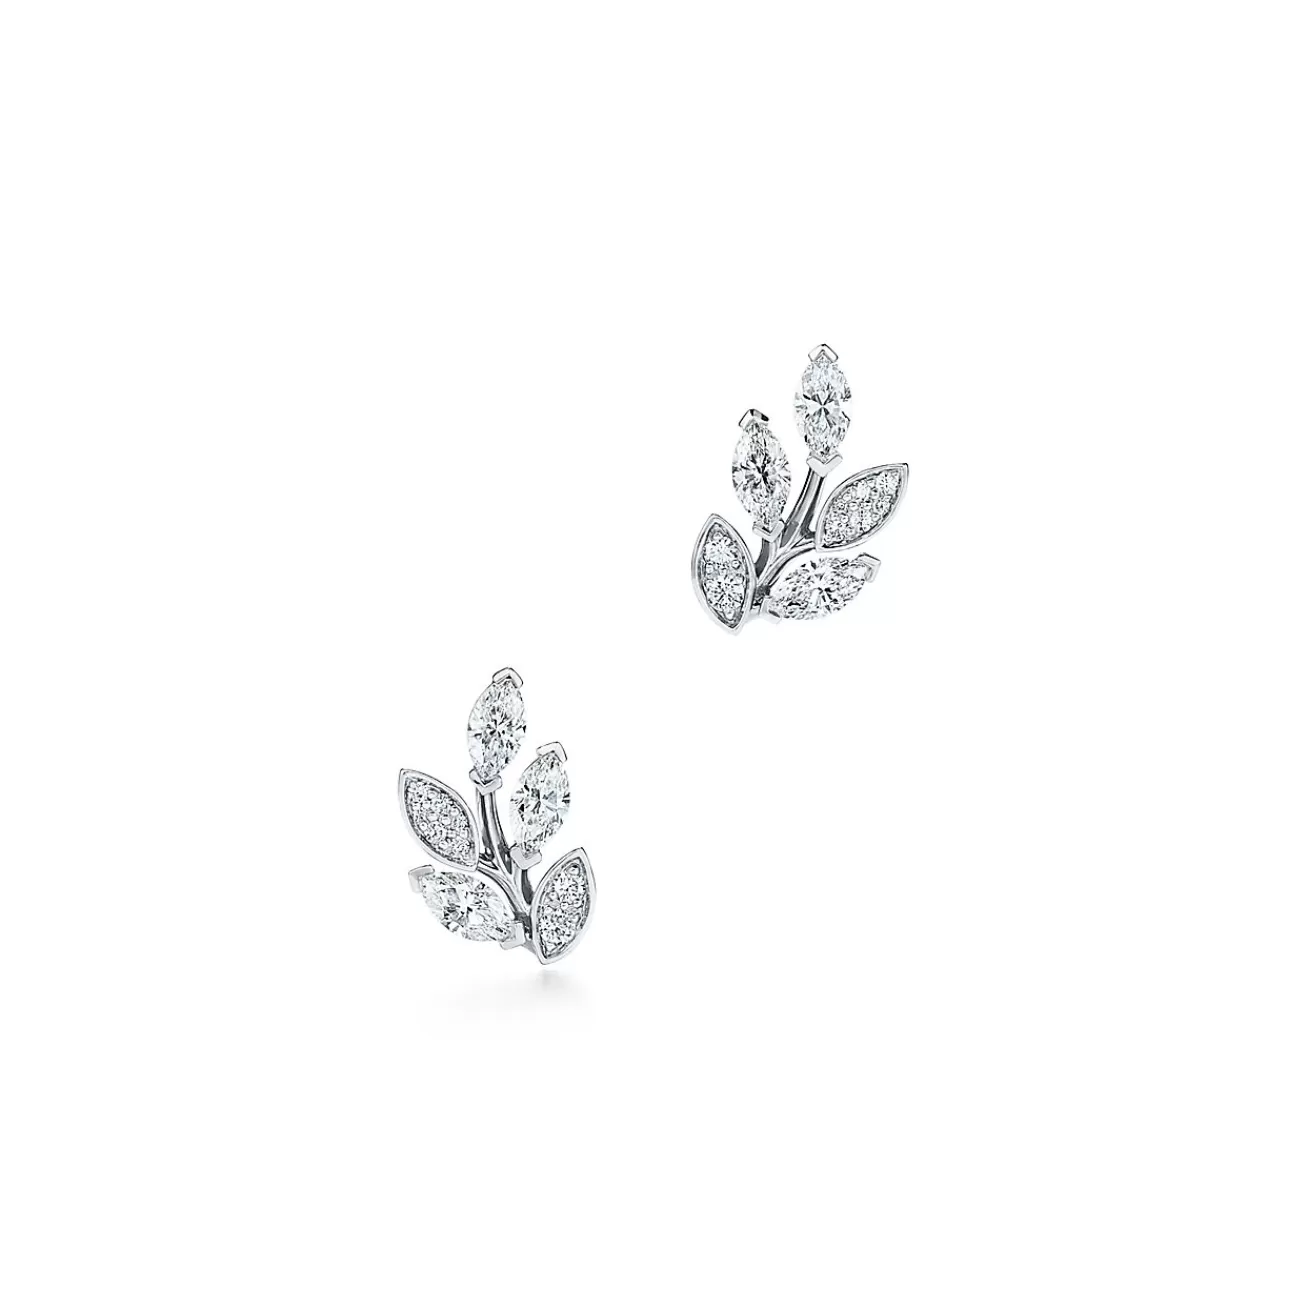 Tiffany & Co. Tiffany Victoria® diamond vine earrings in platinum, small. | ^ Earrings | Gifts for Her